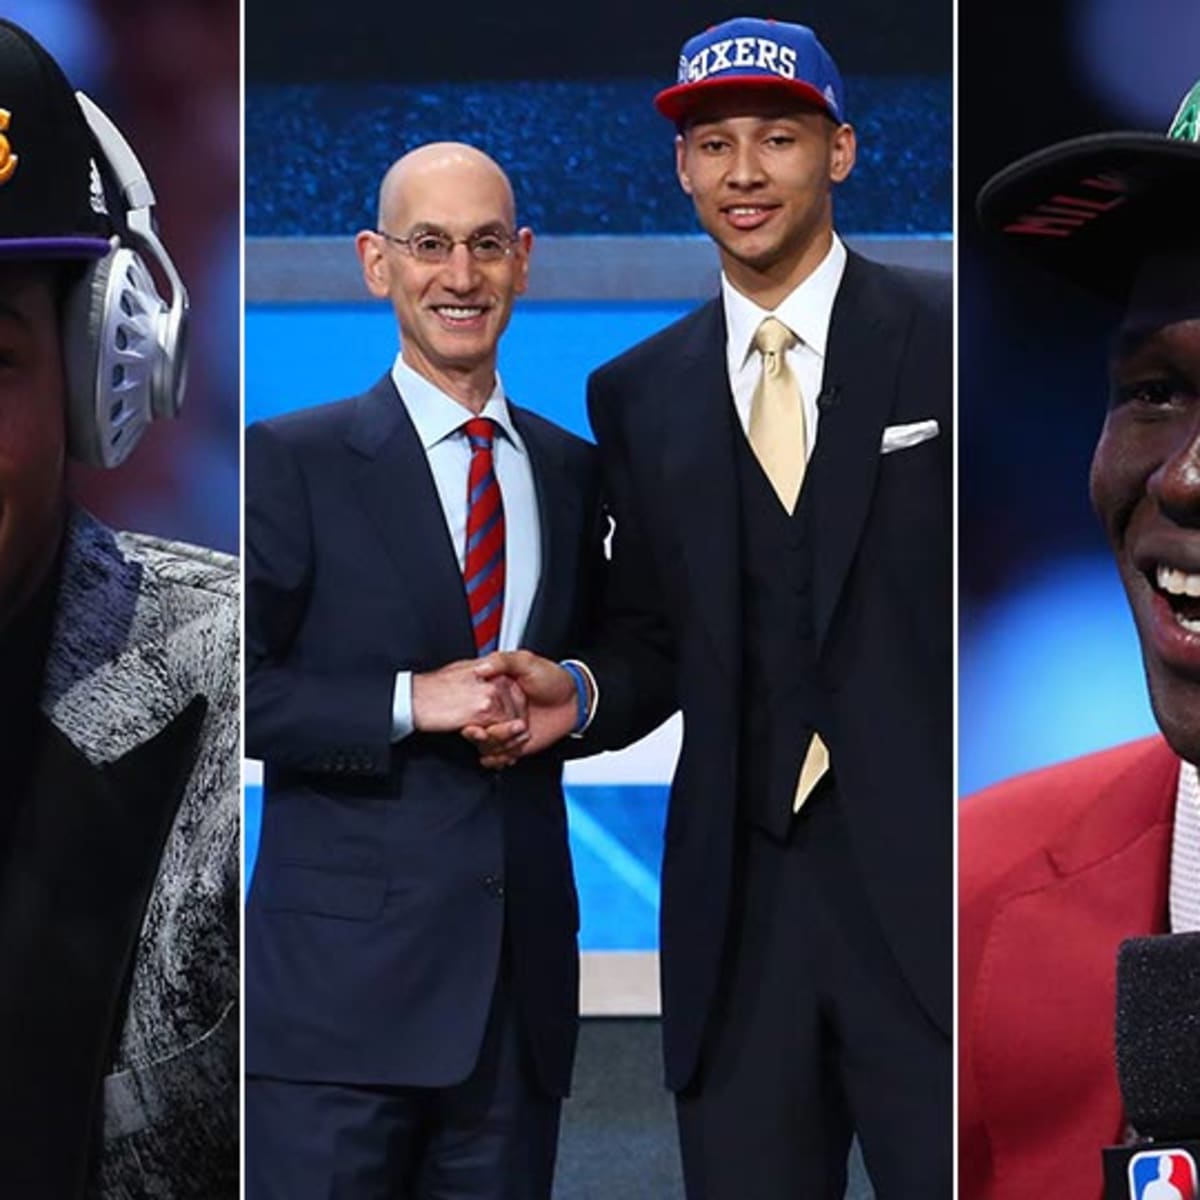 Knicks Fans Can Buy 2016 NBA Draft Hats Even Though Team Doesn't